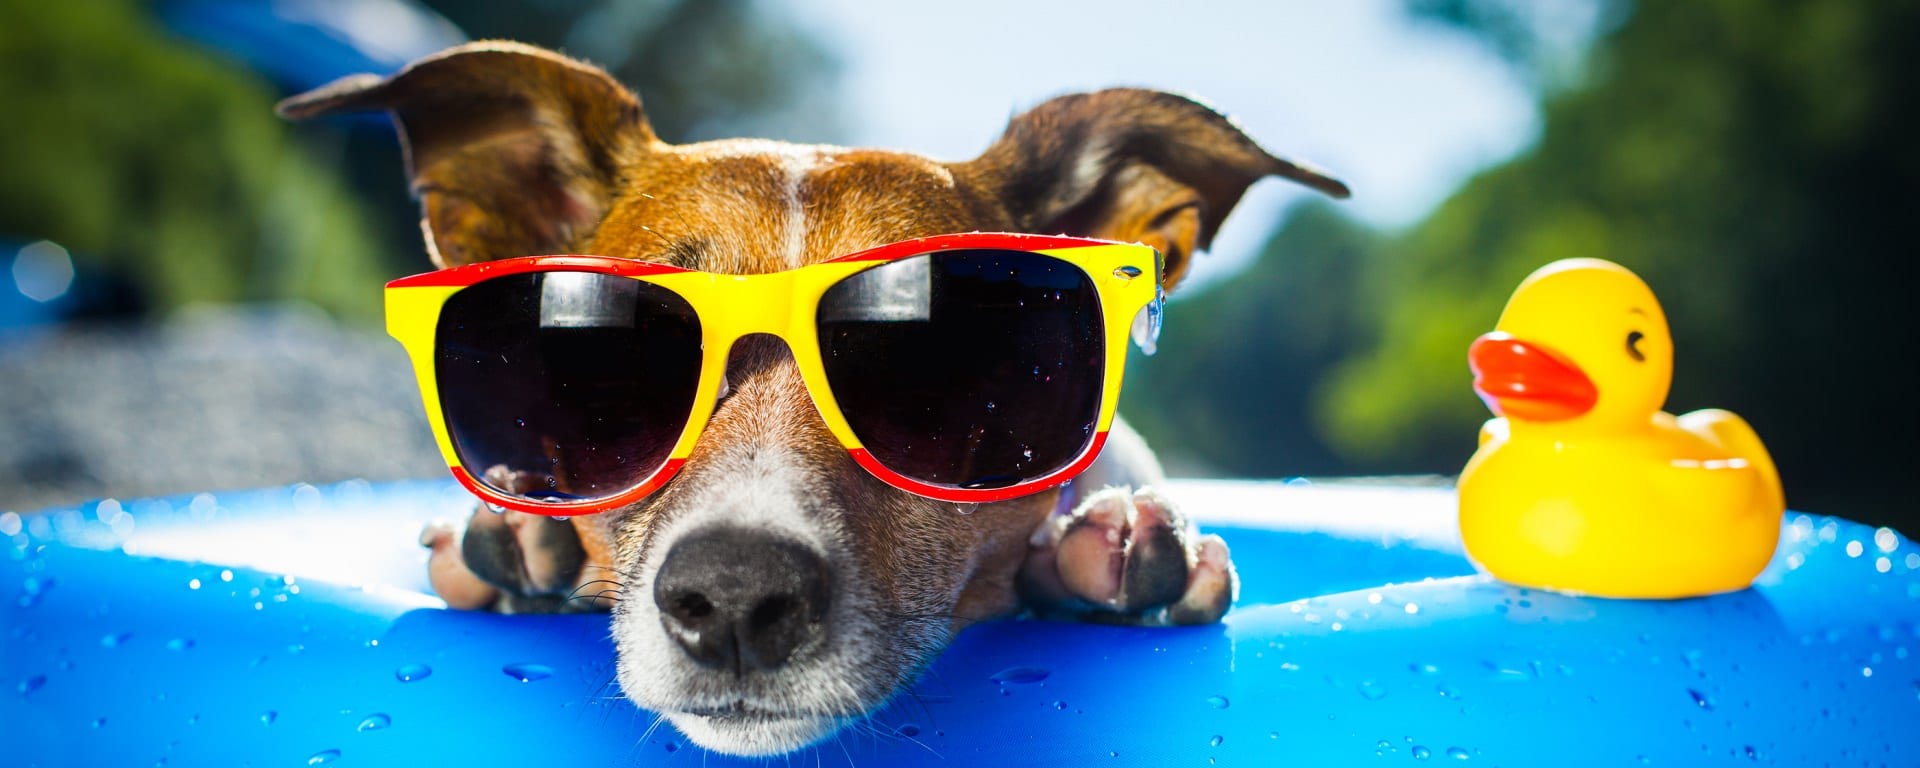 5 AC-Free Tips to Stay Cool This Summer » Trending Us